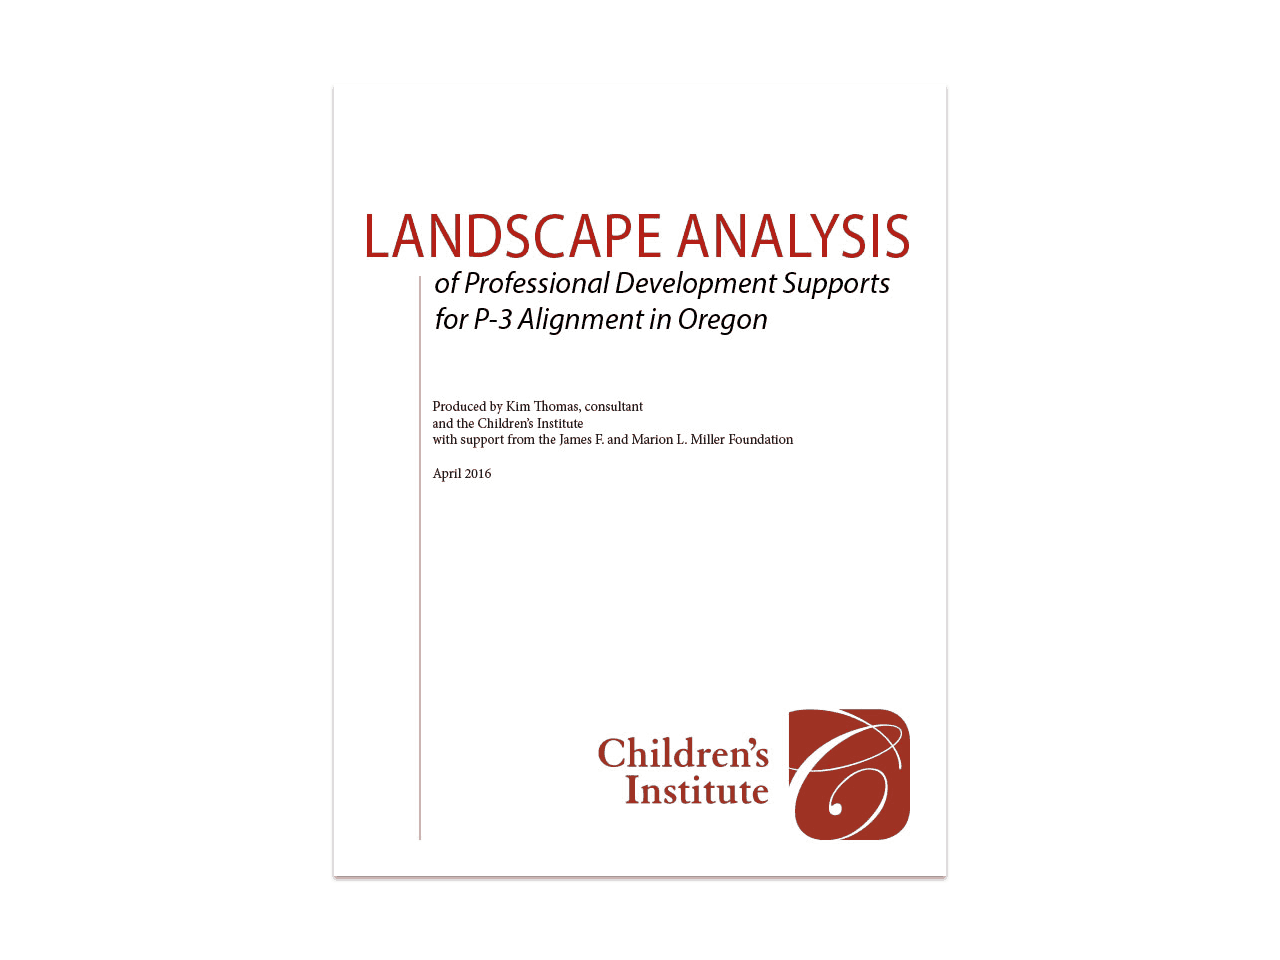 Landscape Analysis of Professional Development Supports for P-3 Alignment in Oregon